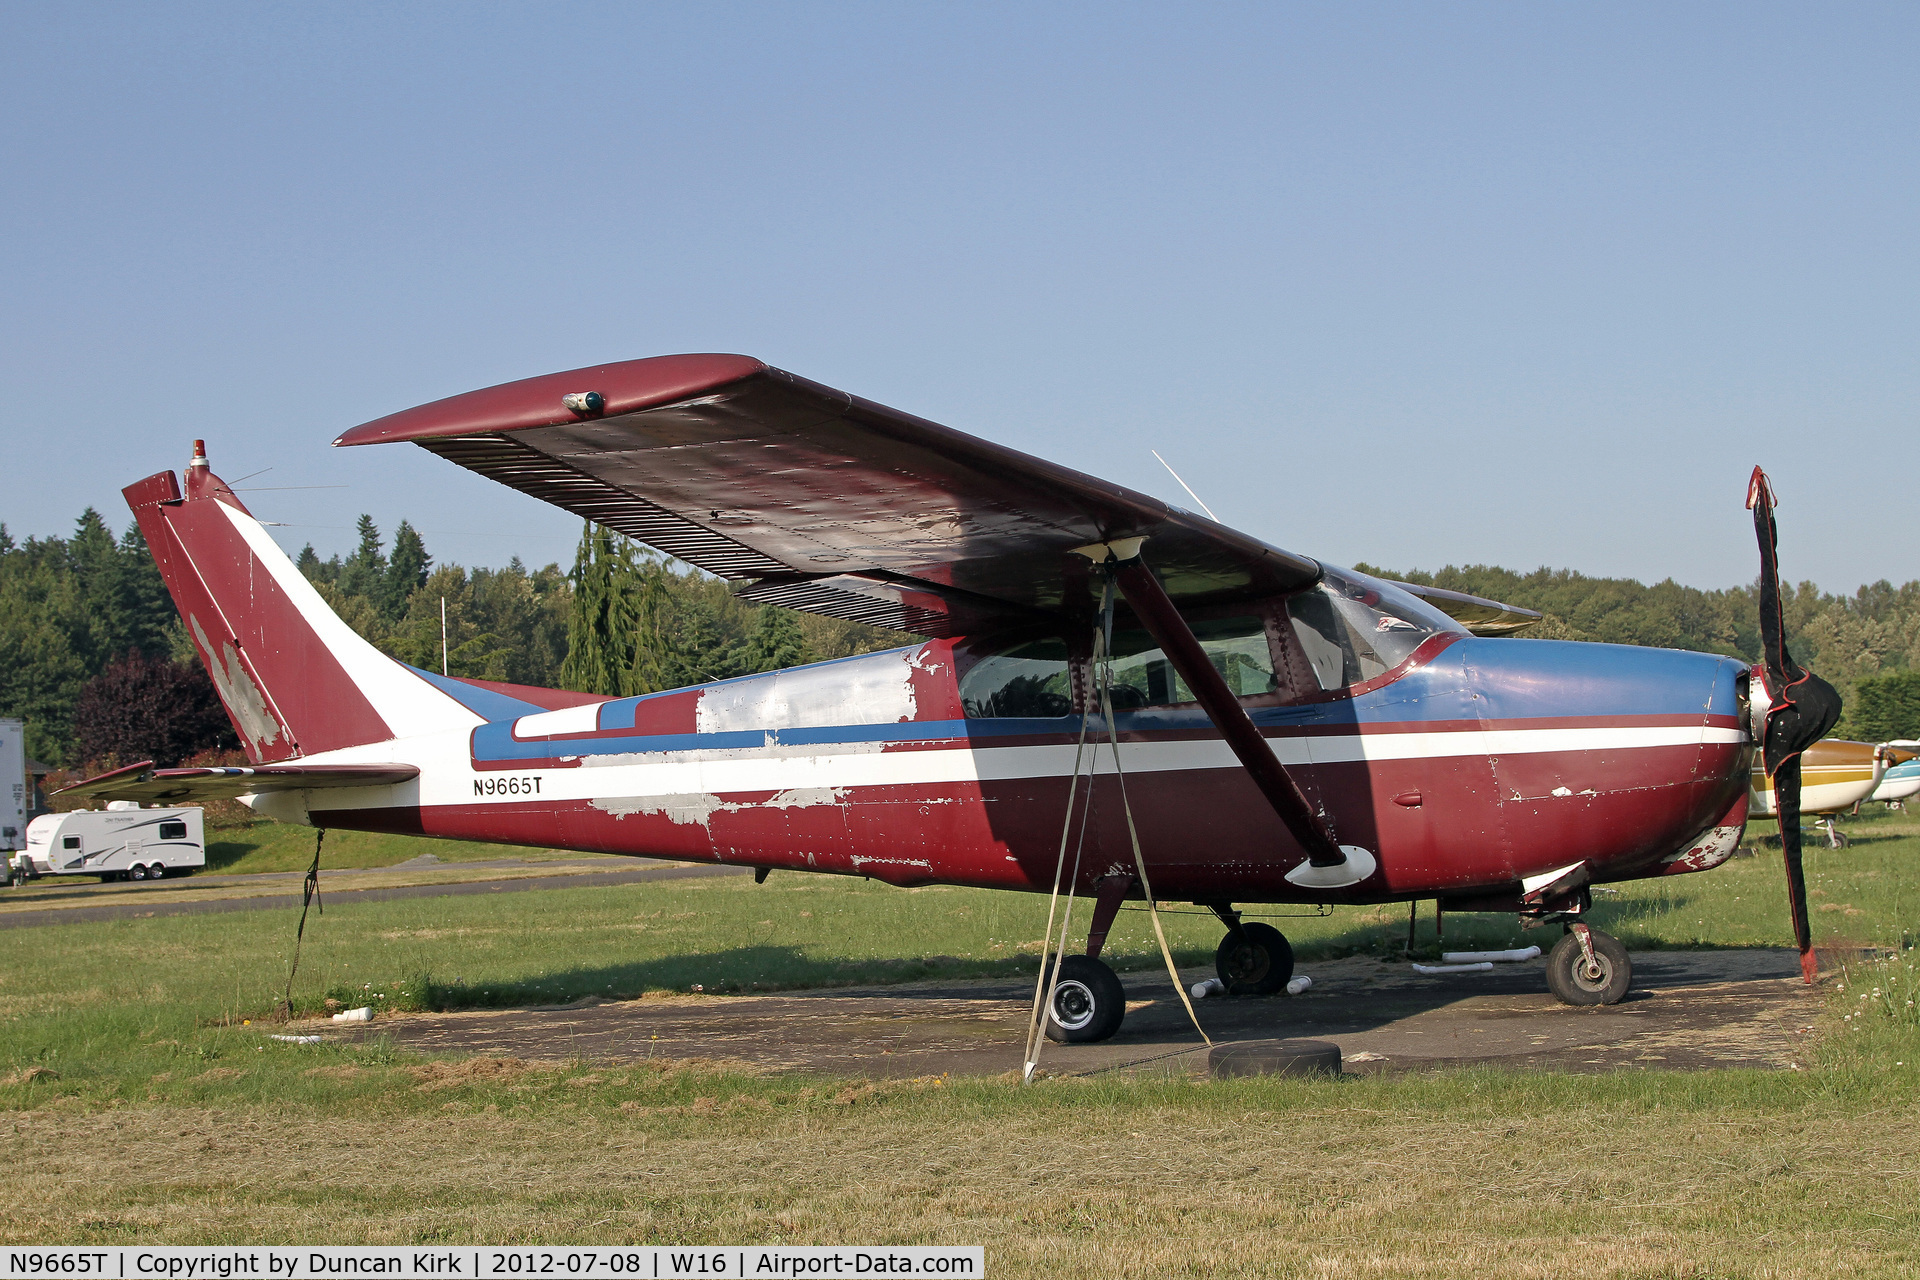 N9665T, 1959 Cessna 210 C/N 57465, Rather ropey looking early Cessna 210